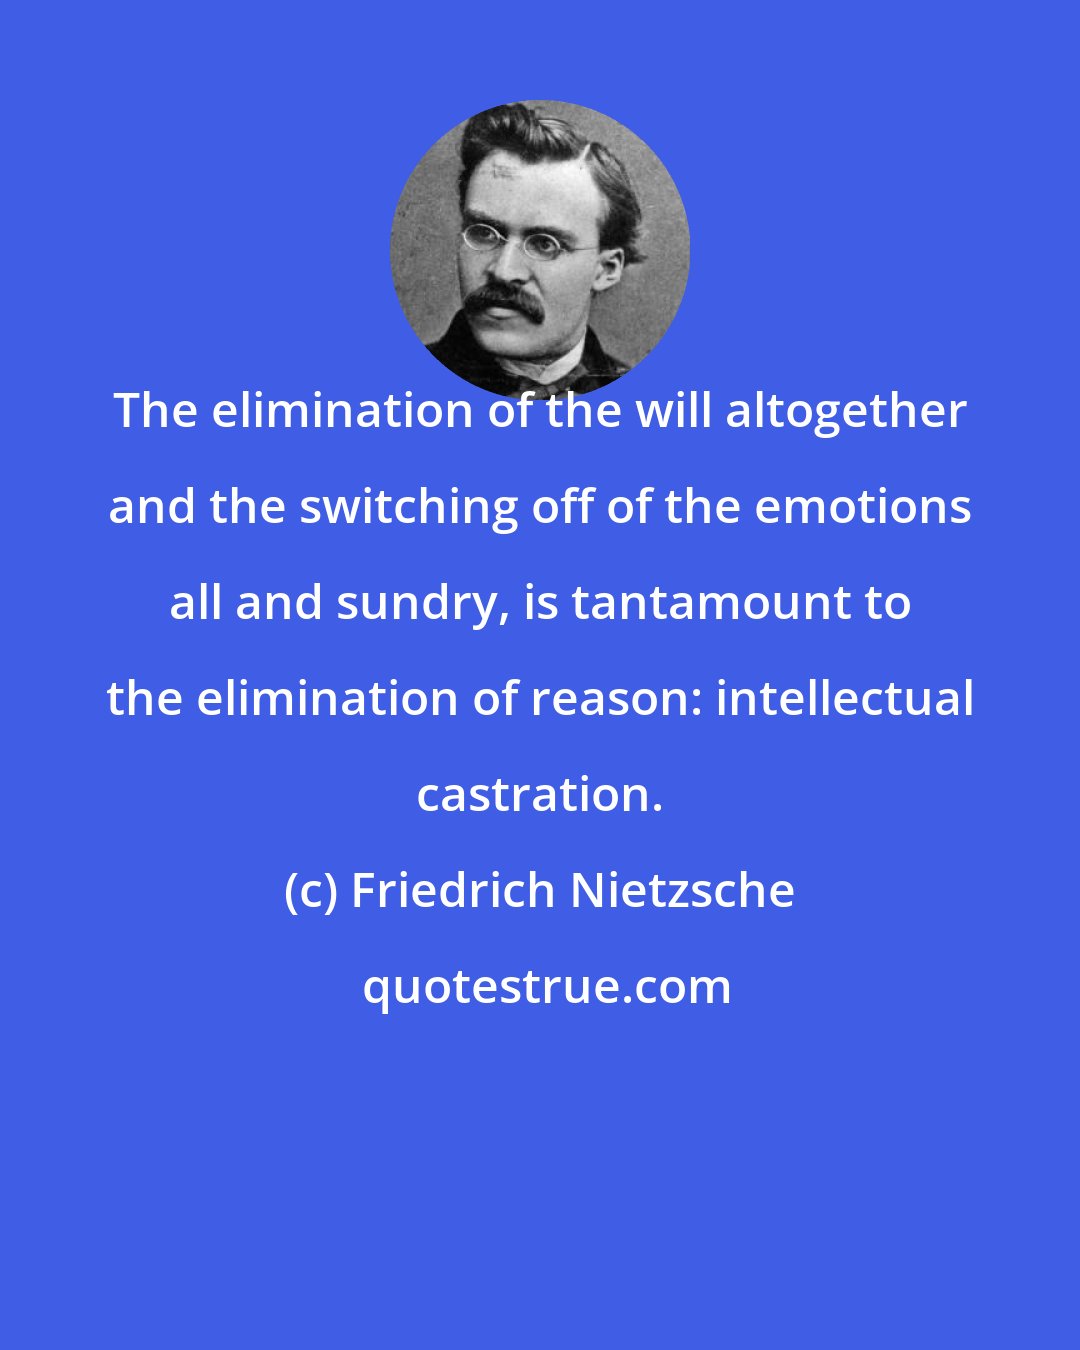 Friedrich Nietzsche: The elimination of the will altogether and the switching off of the emotions all and sundry, is tantamount to the elimination of reason: intellectual castration.